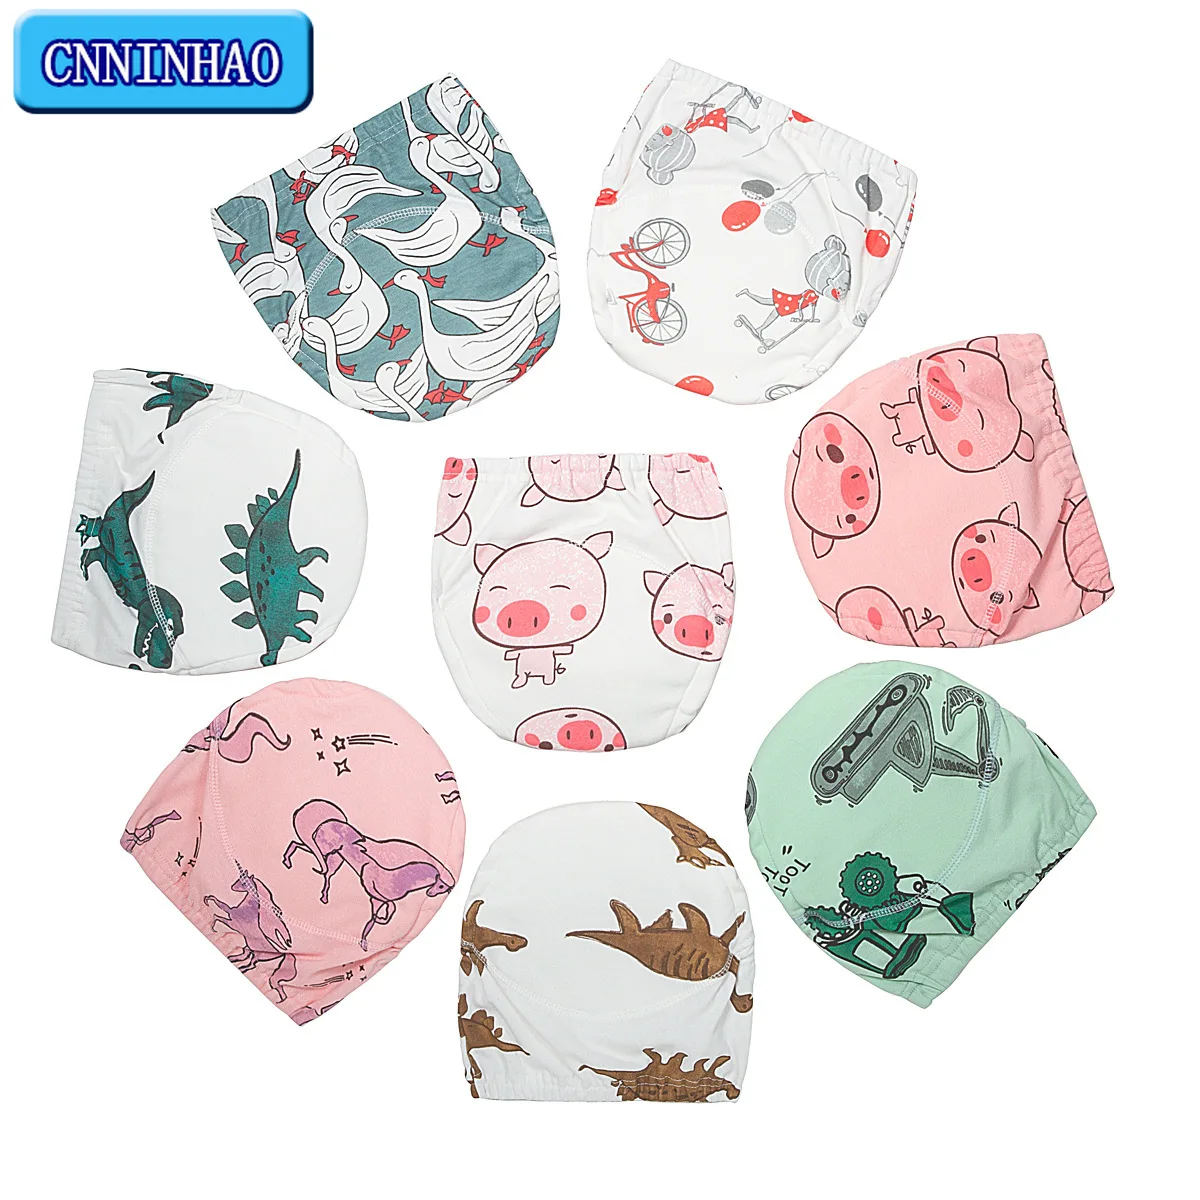 New Baby Potty Toilet Training Pants Nappies Cartoon Boys Girl Underwear for Toddler Cotton Cloth Panties Reusable Diapers Cover